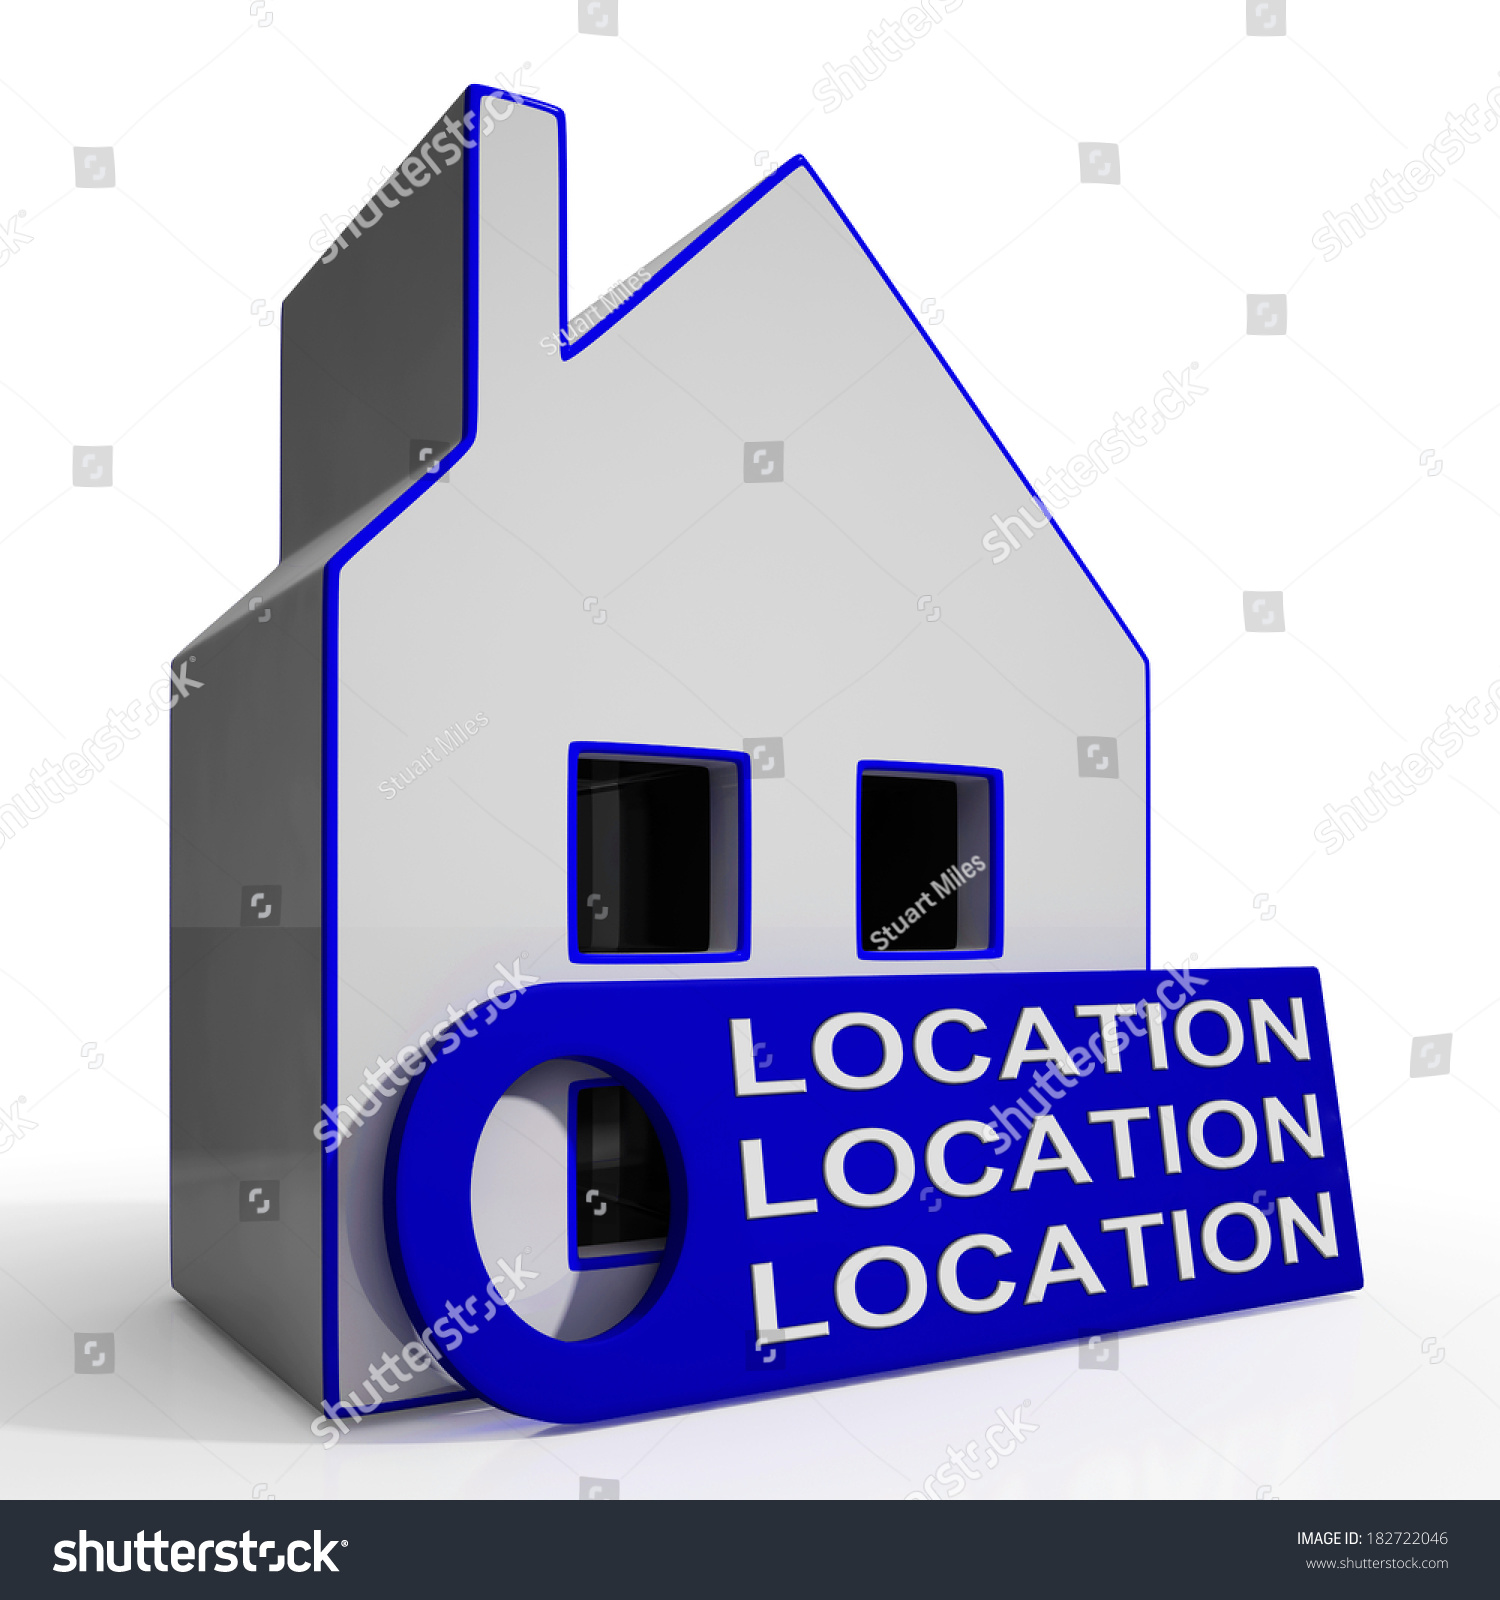 Location Location Location House Meaning Perfect Stock Illustration ...